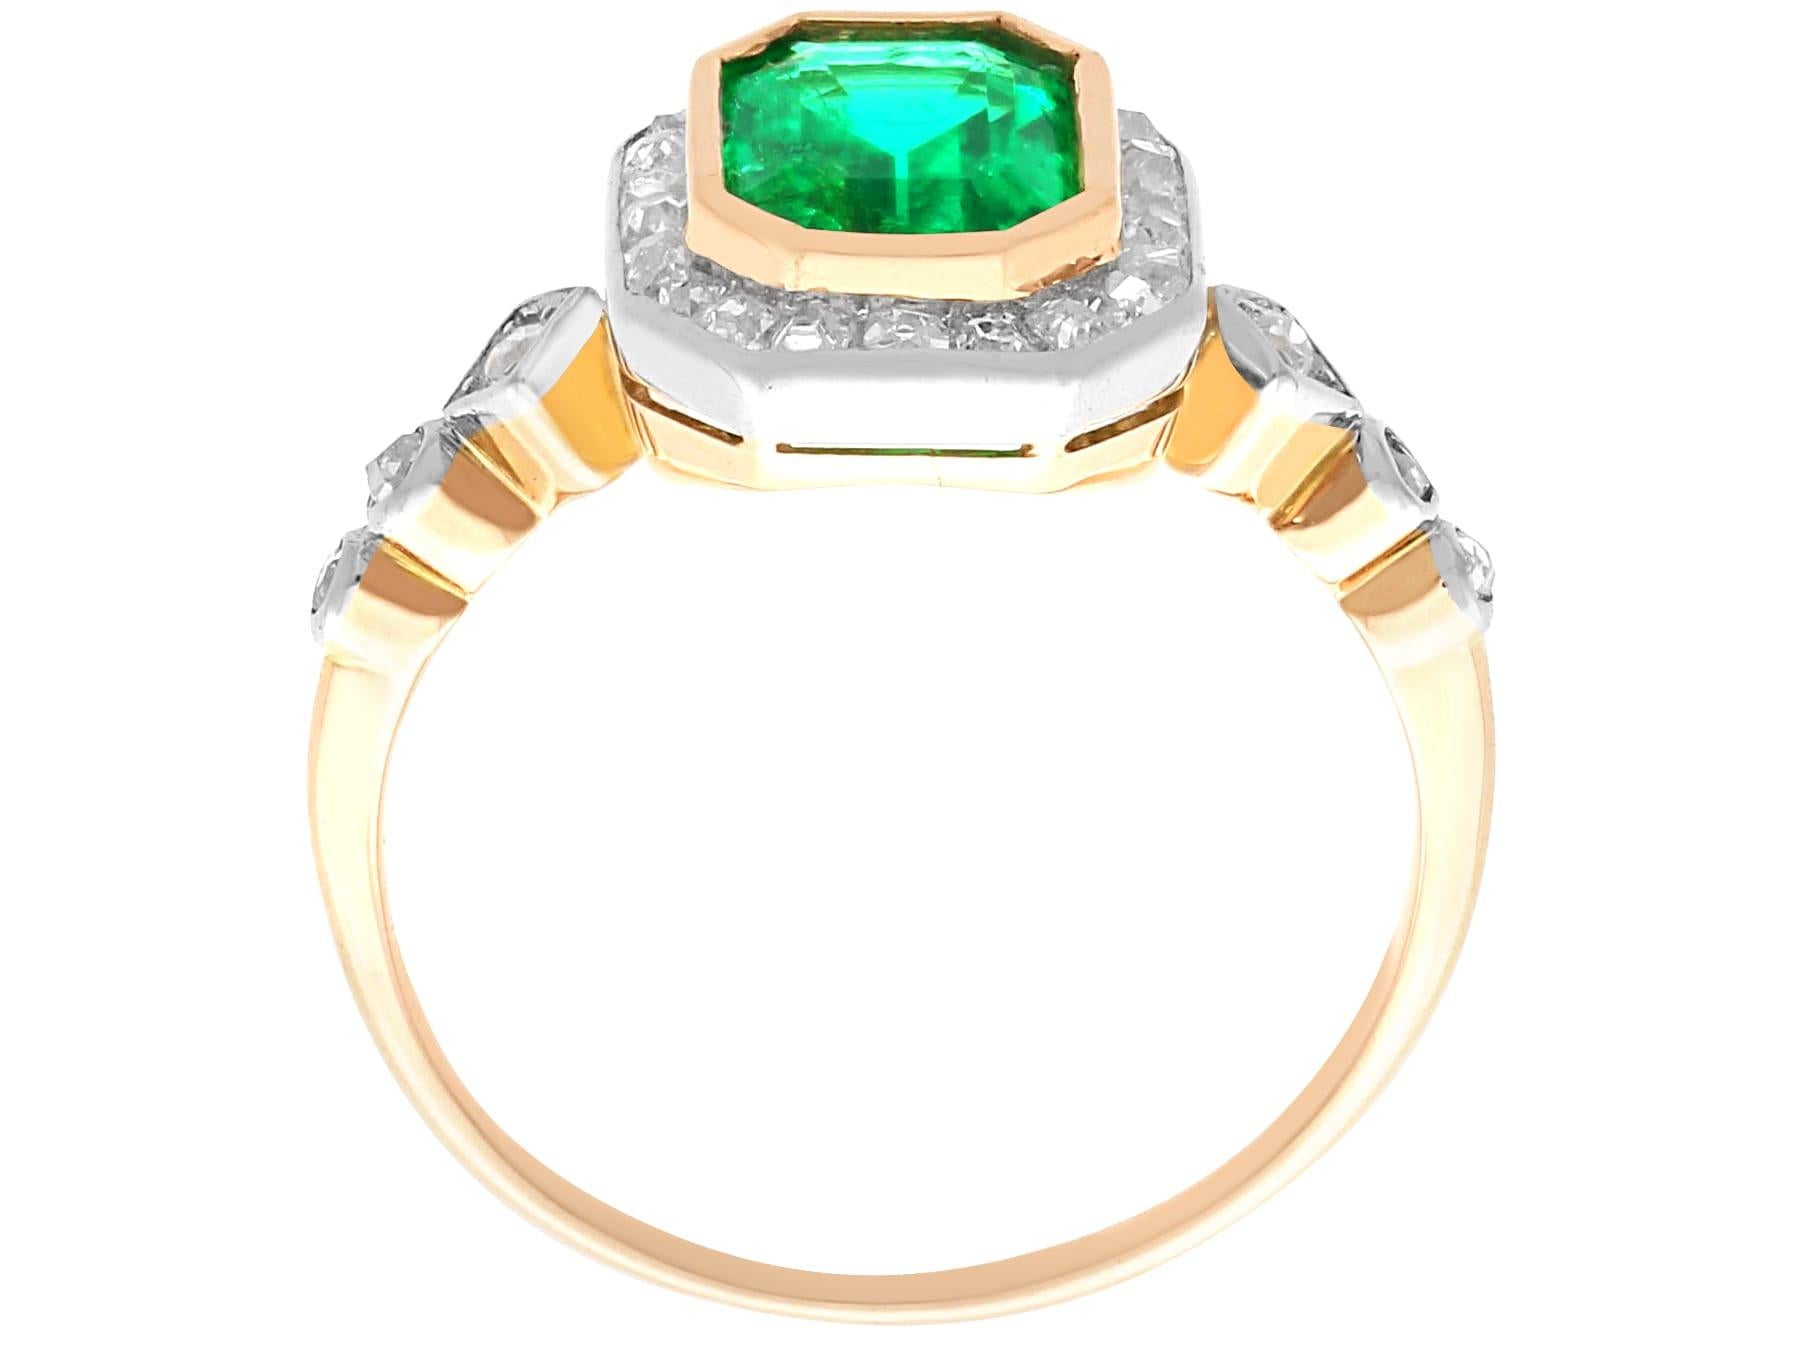 Emerald Cut 1.07 Carat Colombian Emerald and Diamond Ring For Sale 1